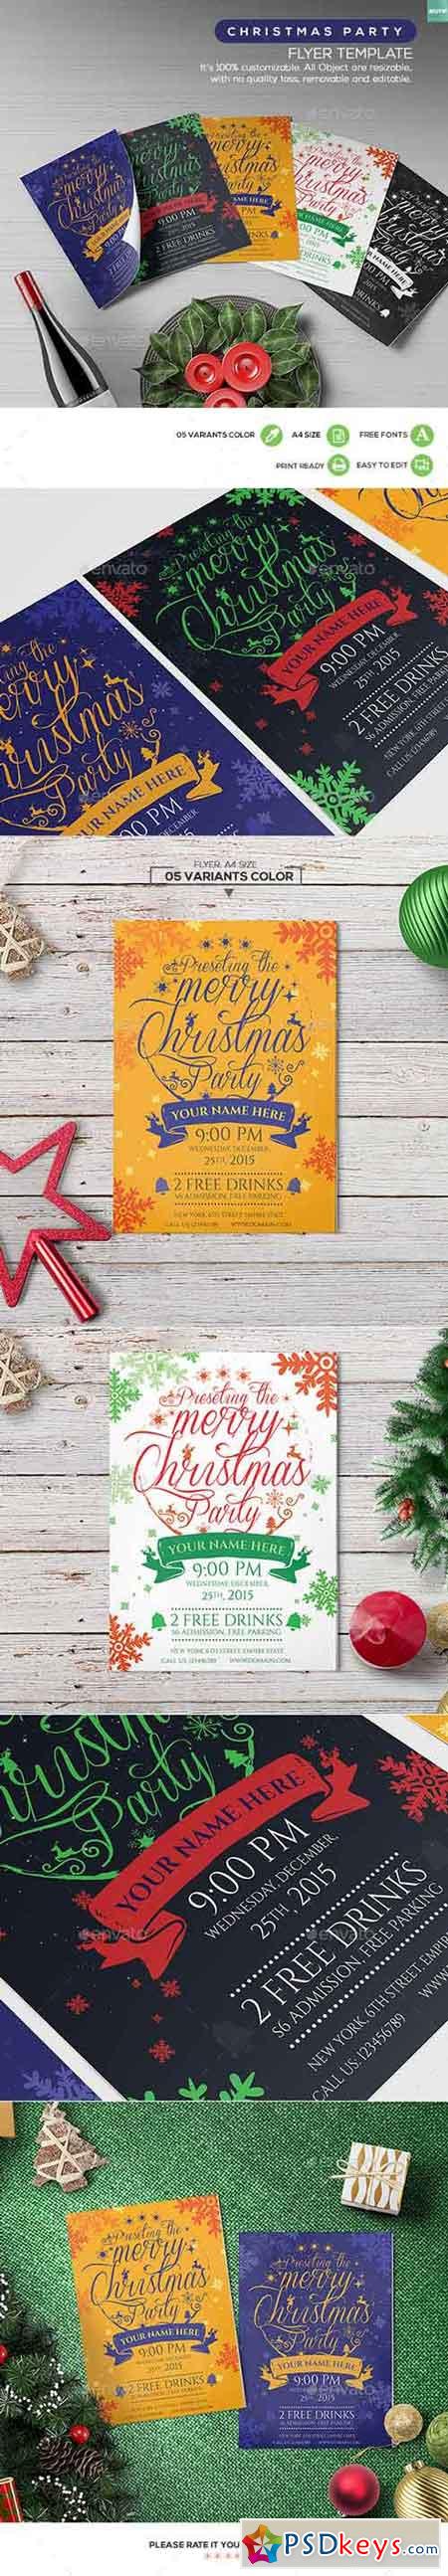 Christmas Party - Flyer Template 03 13745527